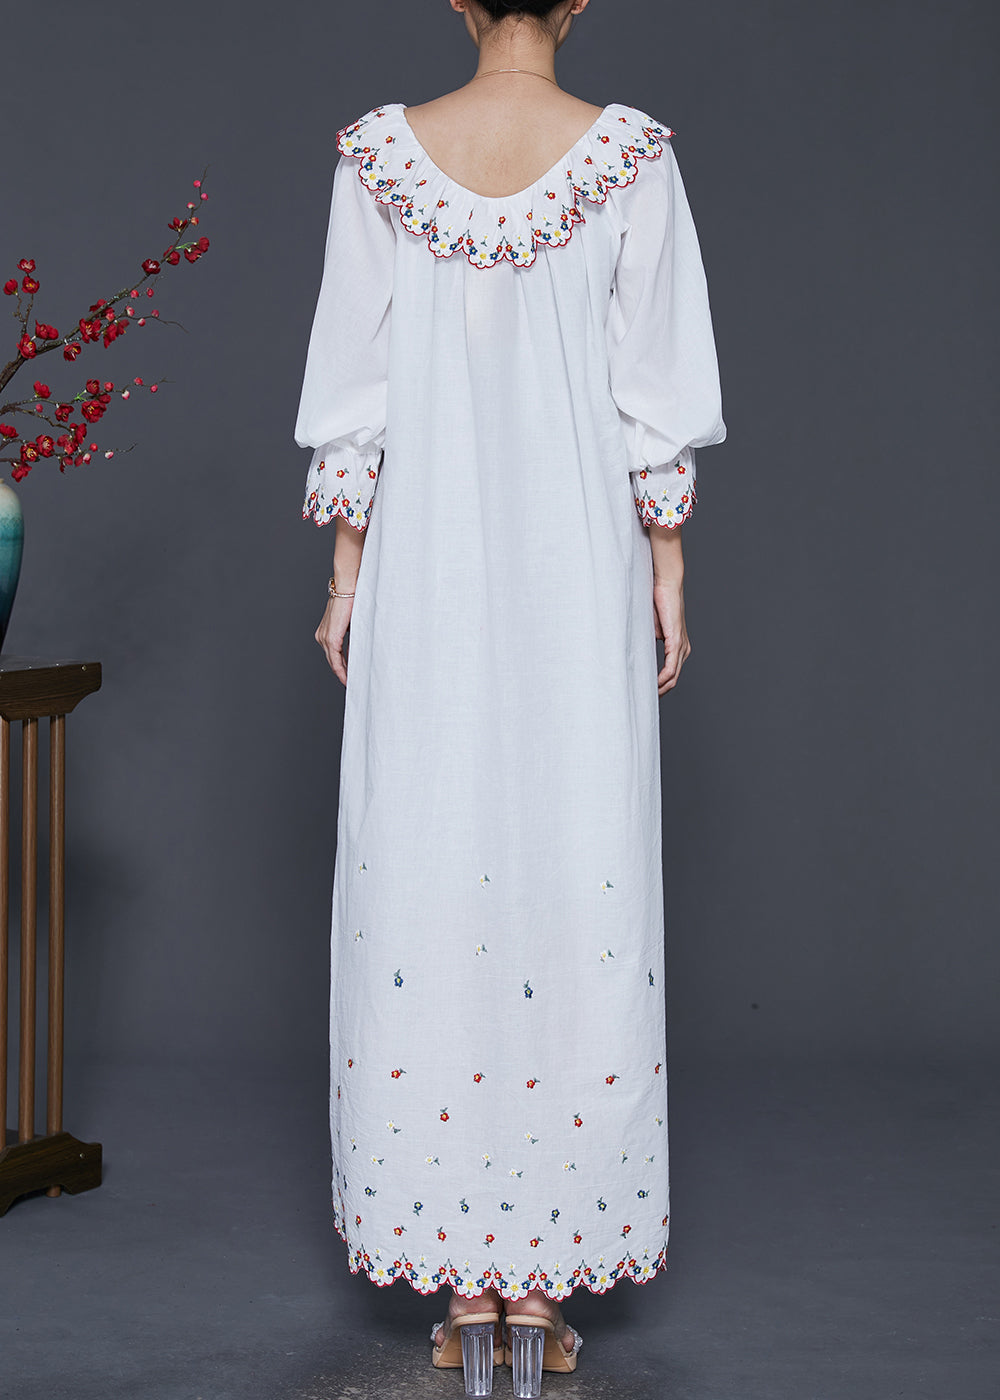 Style White Ruffled Embroidered Cotton Long Dress Spring